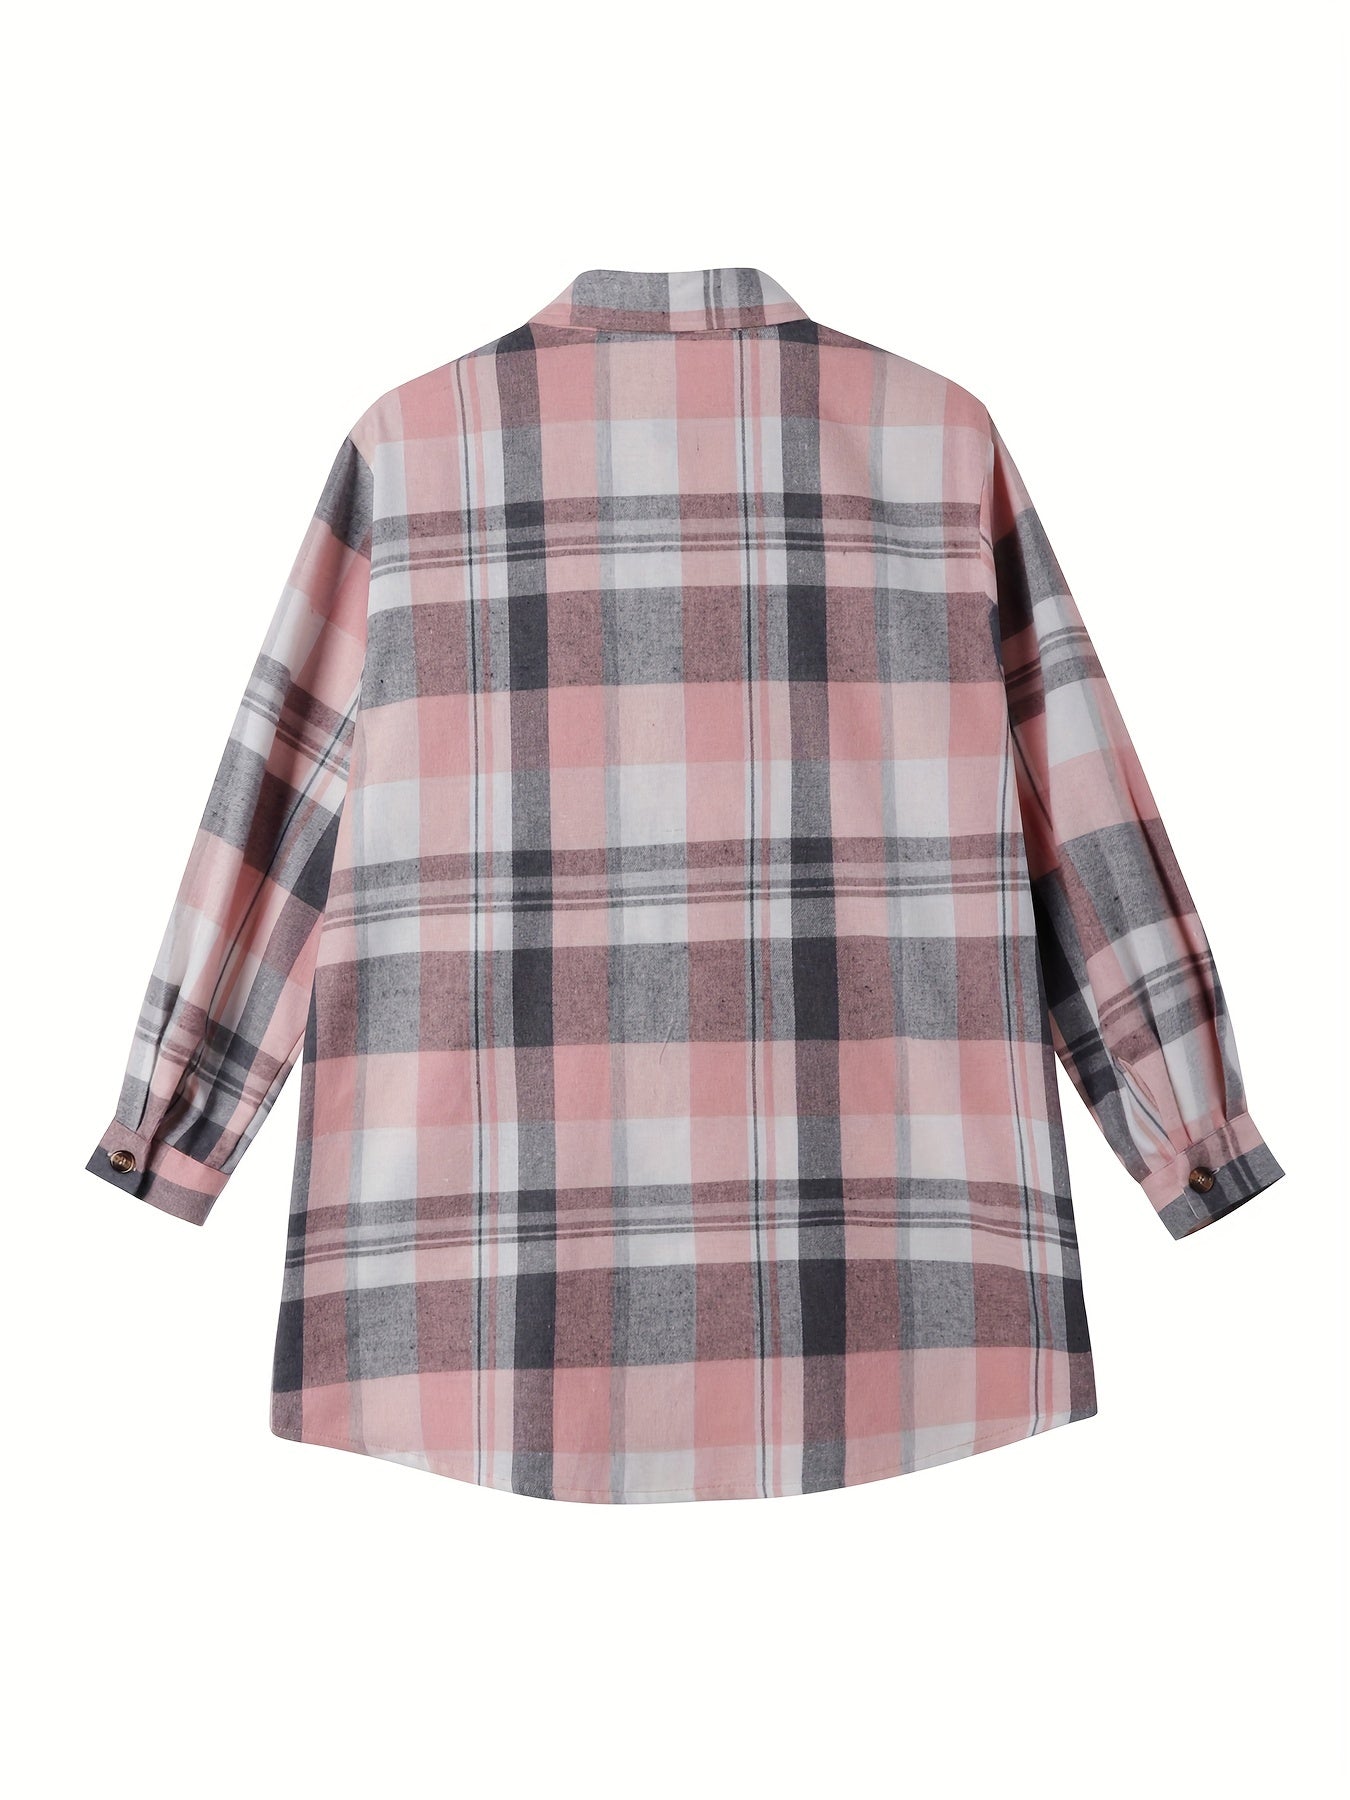 Plus Size Casual Blouse, Women's Plus Plaid Print Button Up Long Sleeve Turn Down Collar Shacket